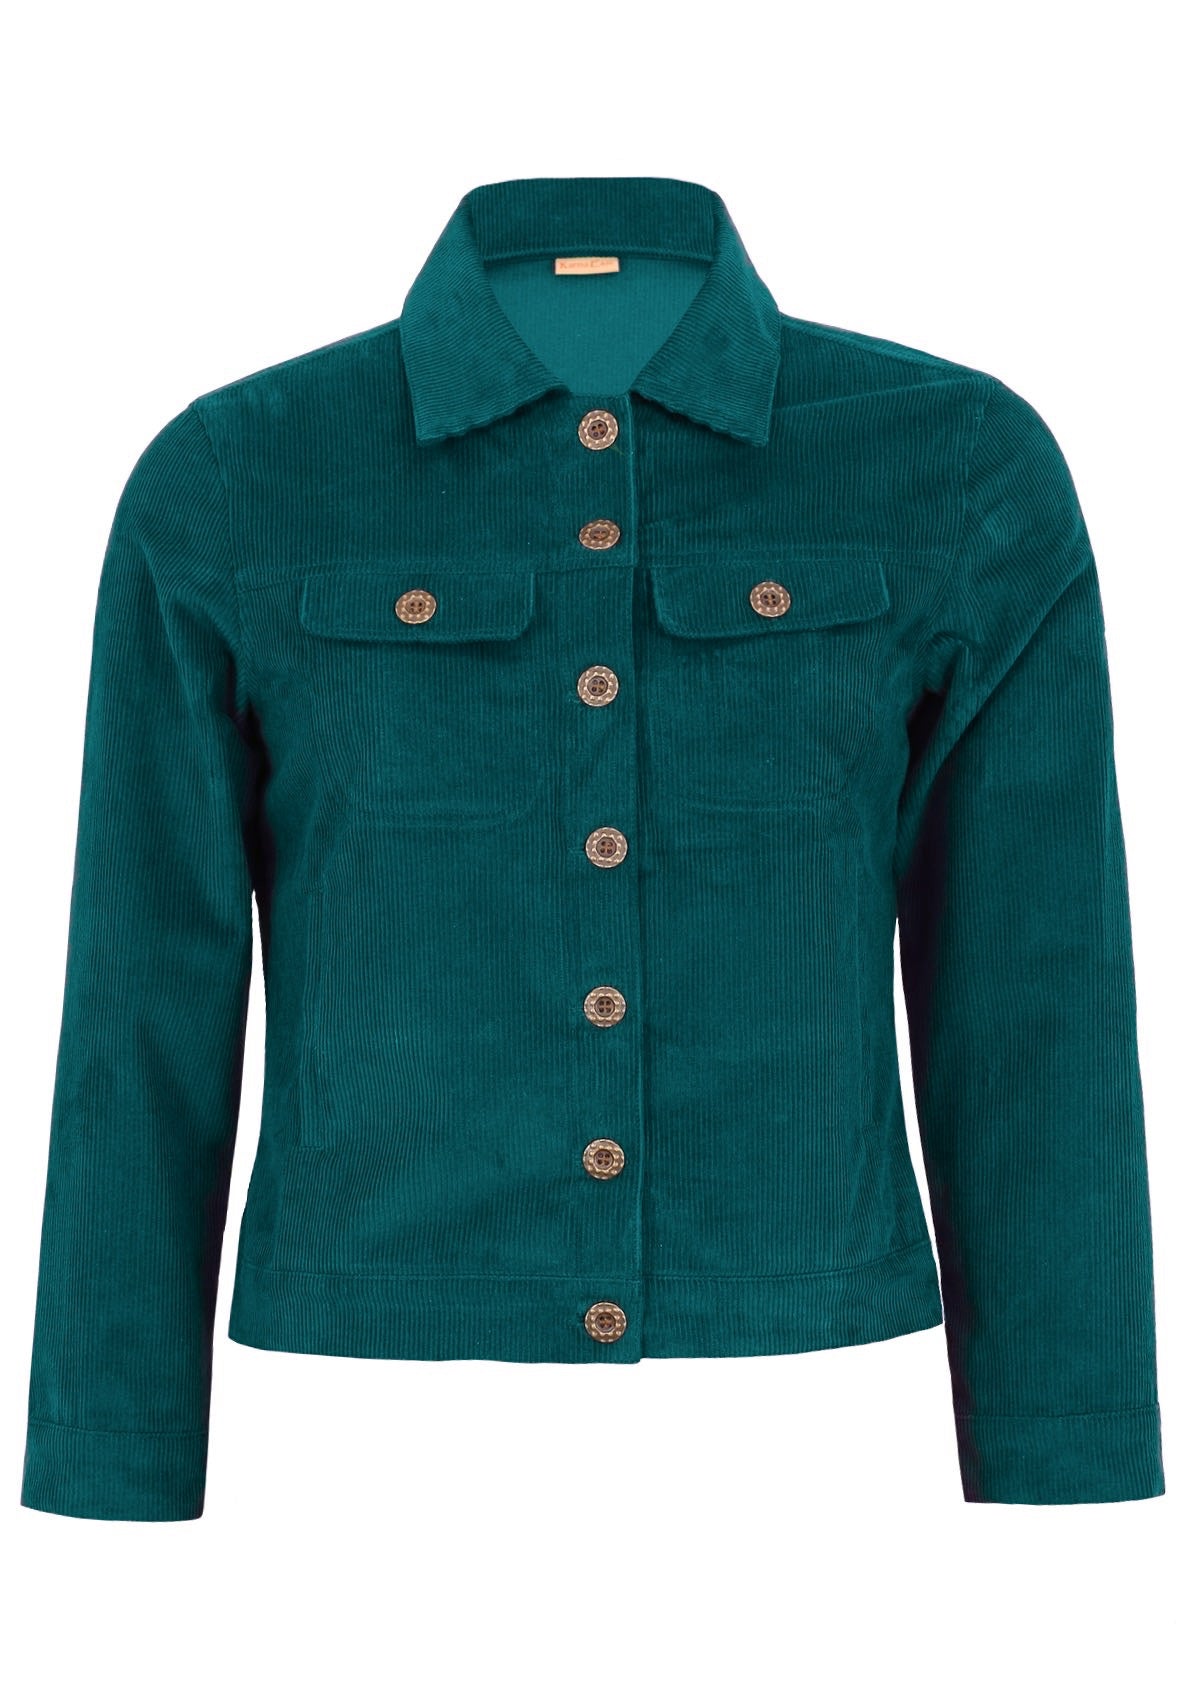 100% cotton corduroy jacket in deep teal with functional brass buttons. 